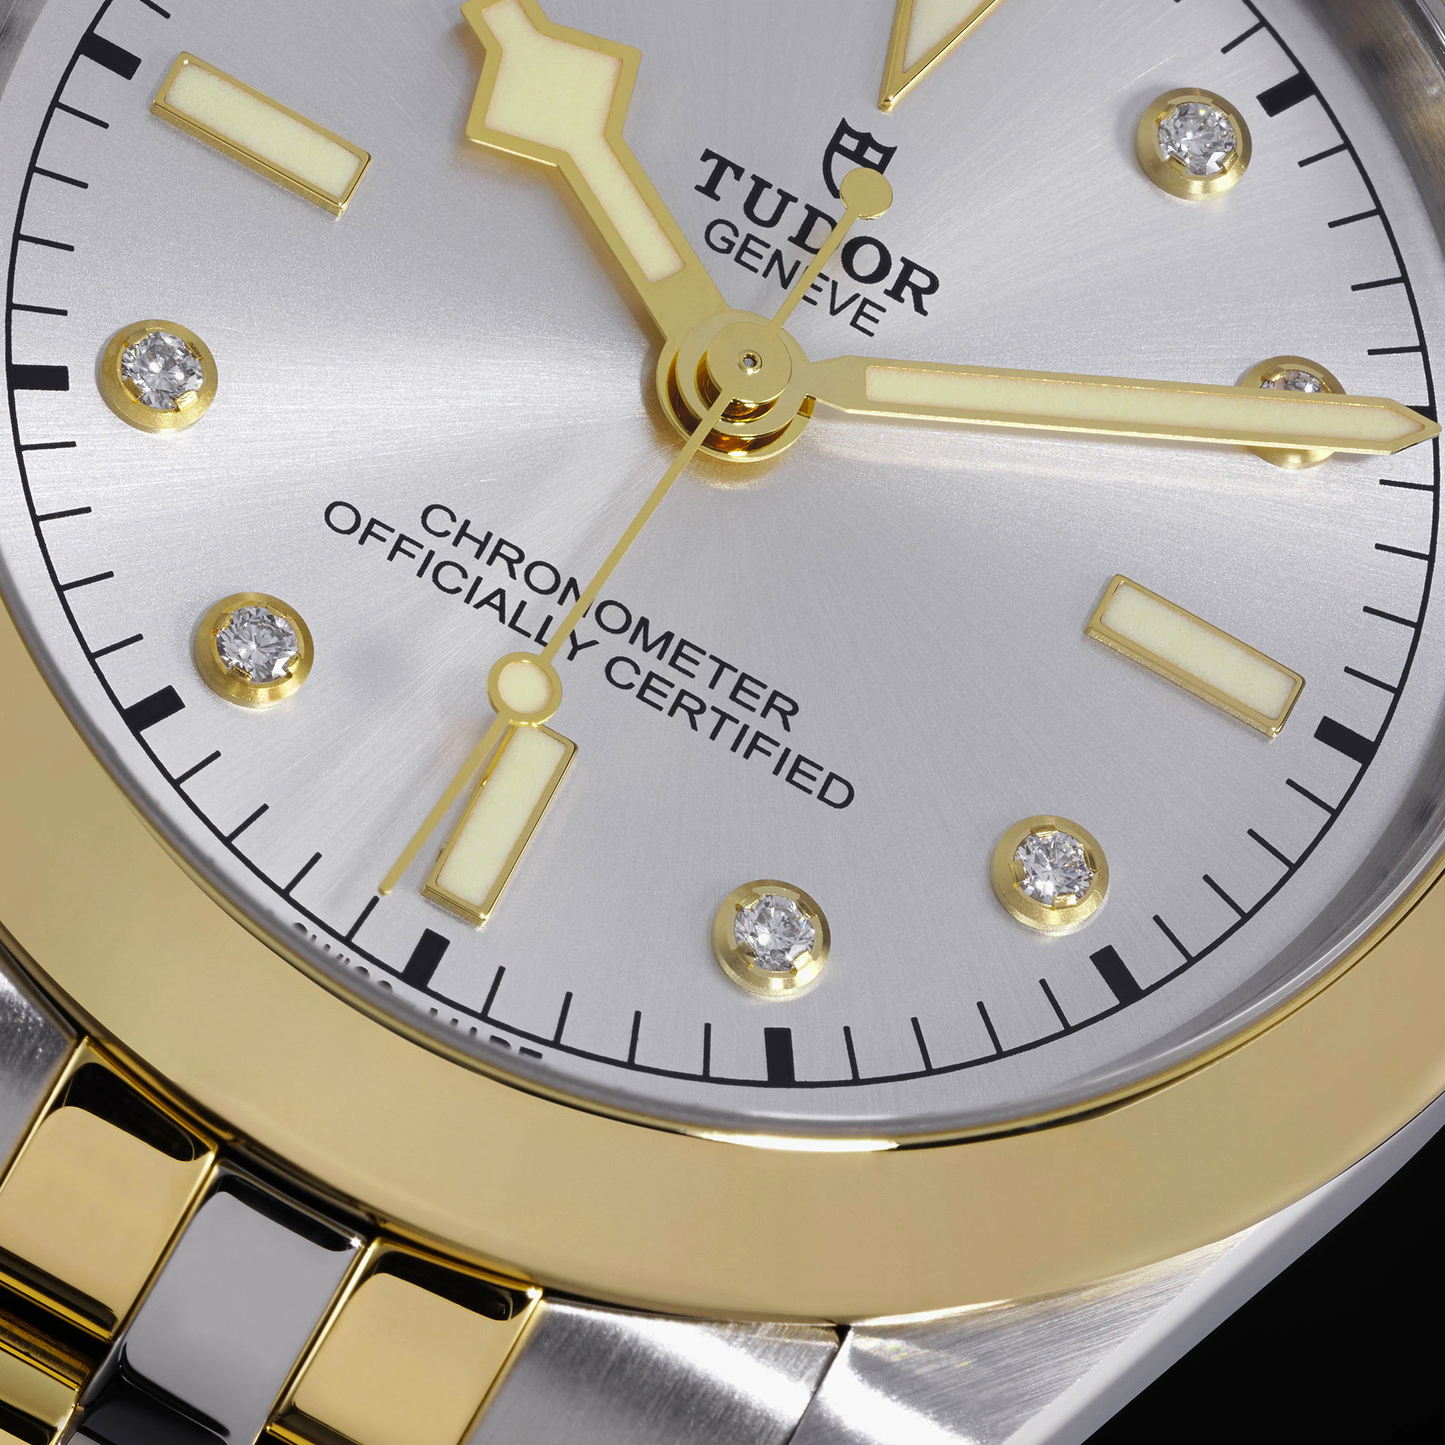 Tudor Black Bay 39 S&G, 316L Stainless Steel and 18k Yellow Gold, Ref# M79663-0007, Dial